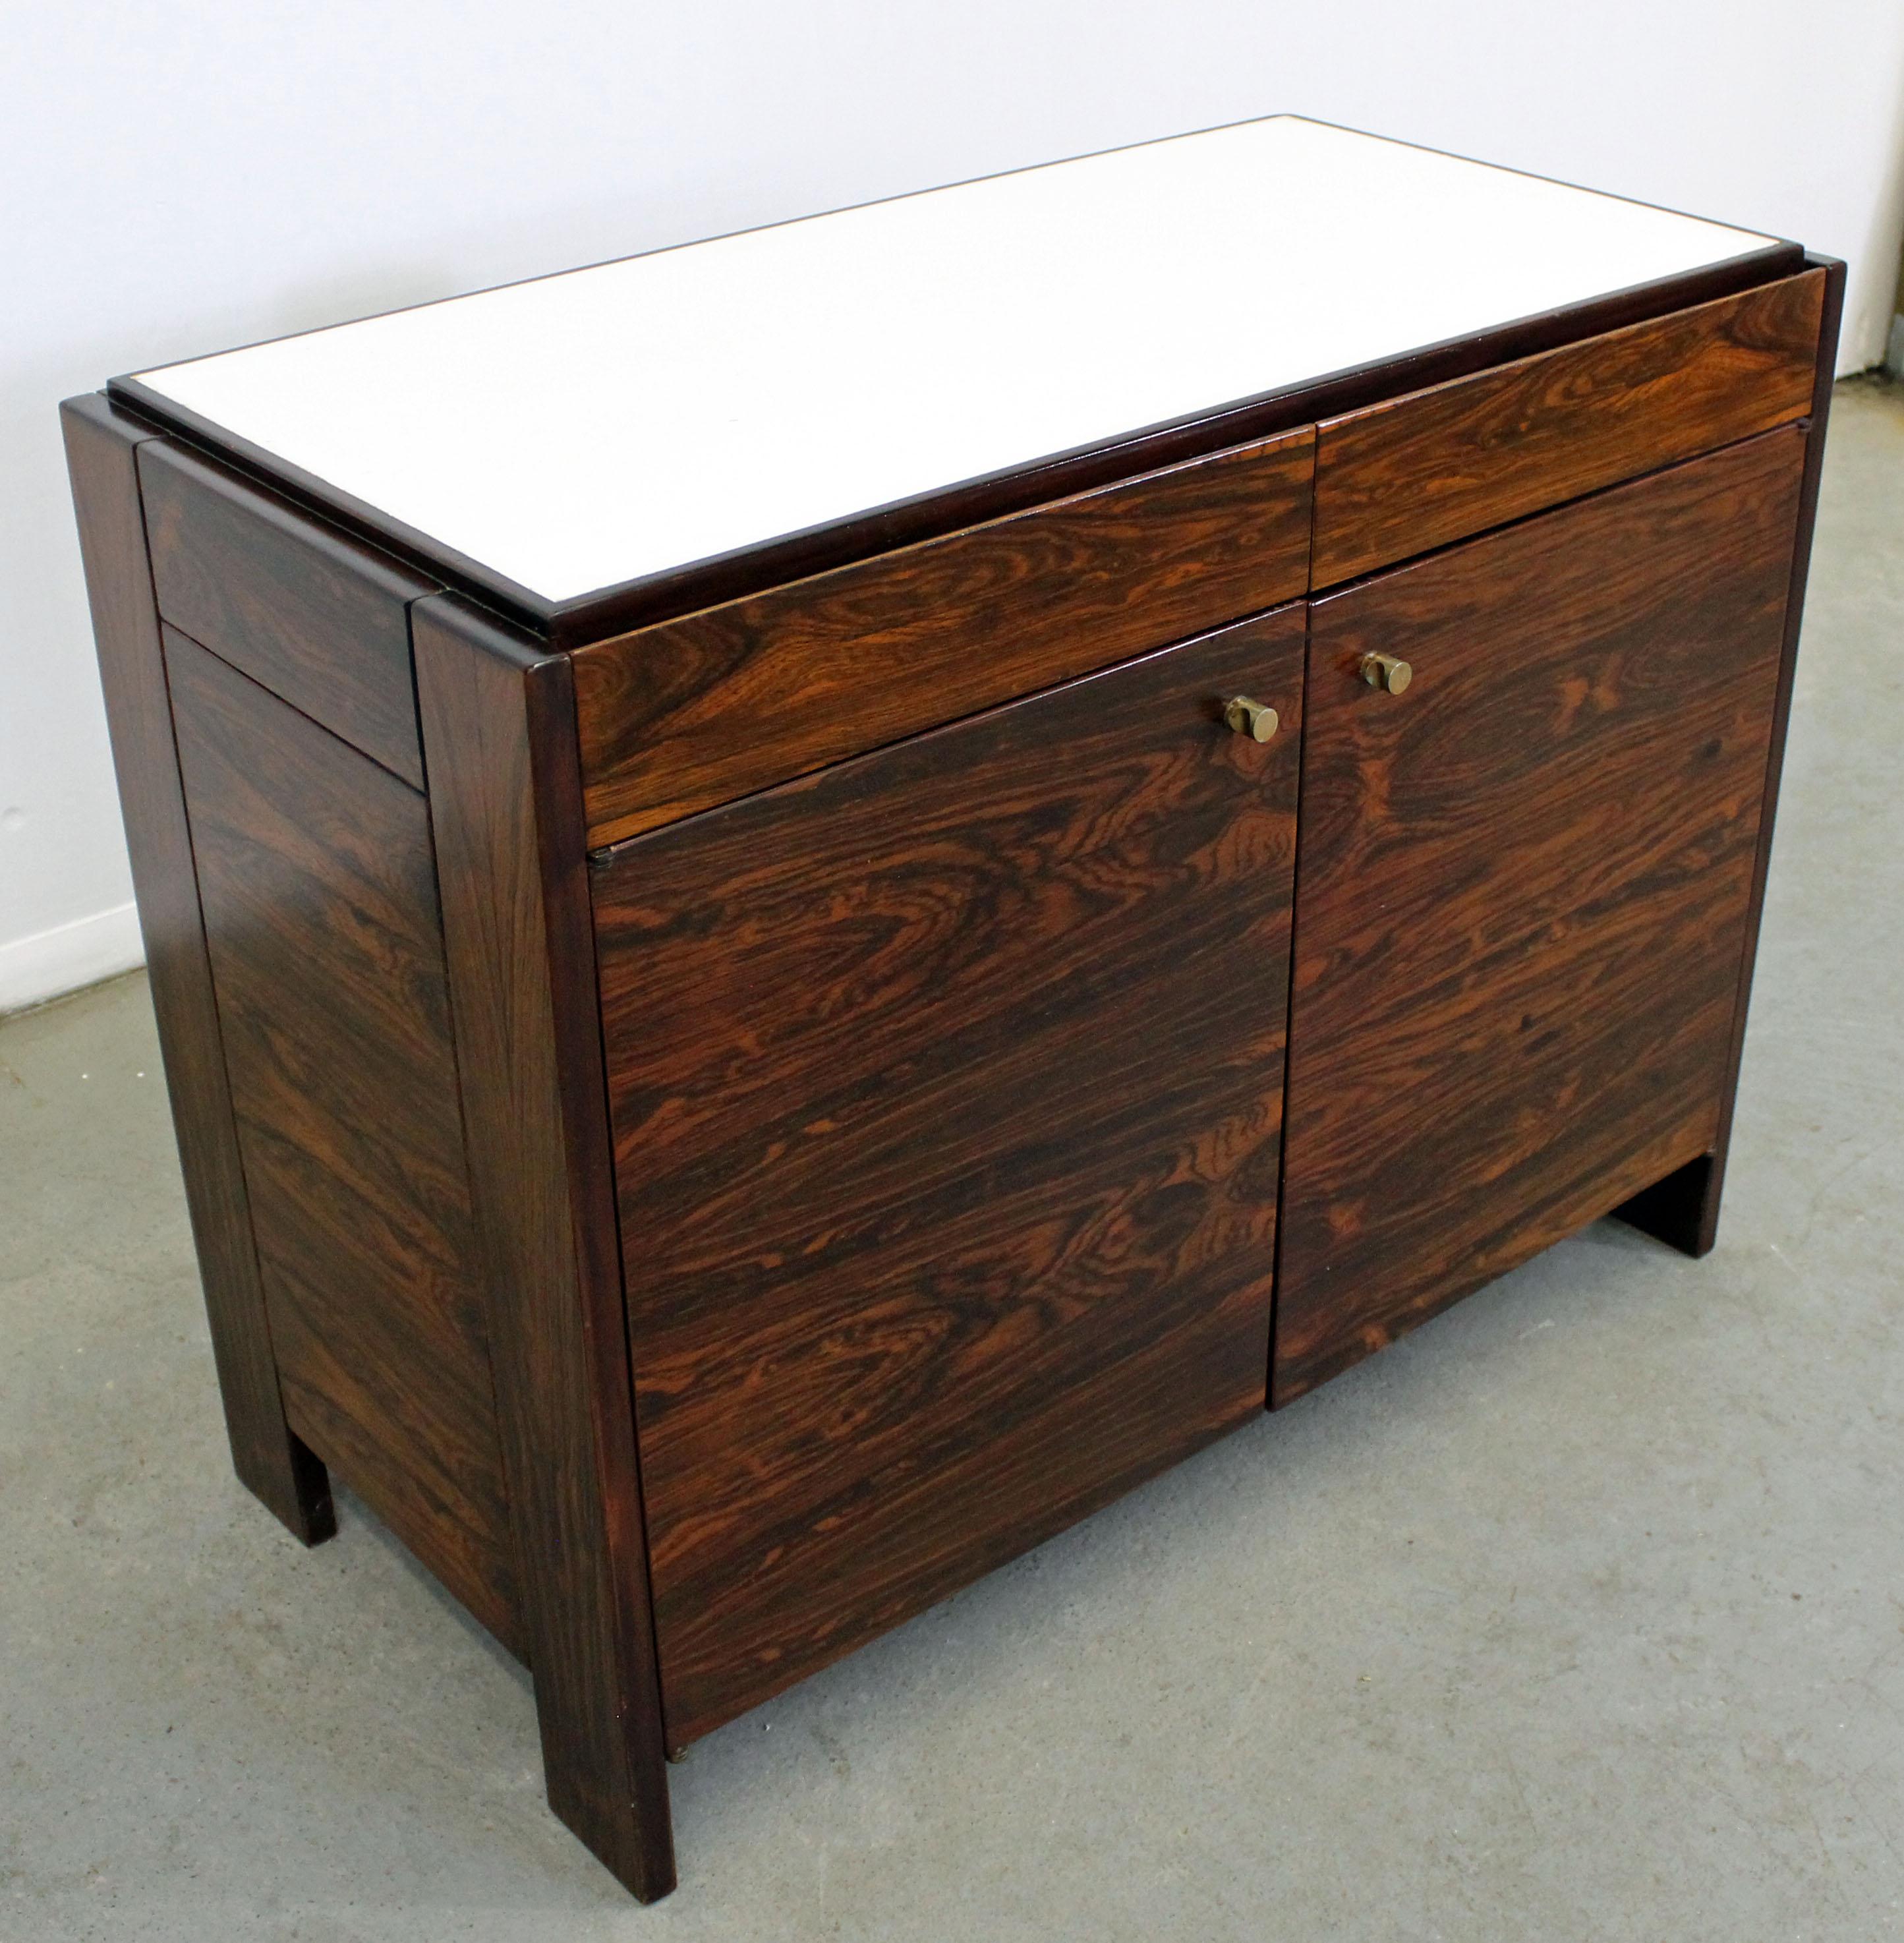 What a find. Offered is a gorgeous Mid-Century Modern rosewood server with a white laminate top by Knoll. This server features two drawers atop and two doors with adjustable shelving inside. It is in excellent condition for its age, shows some age